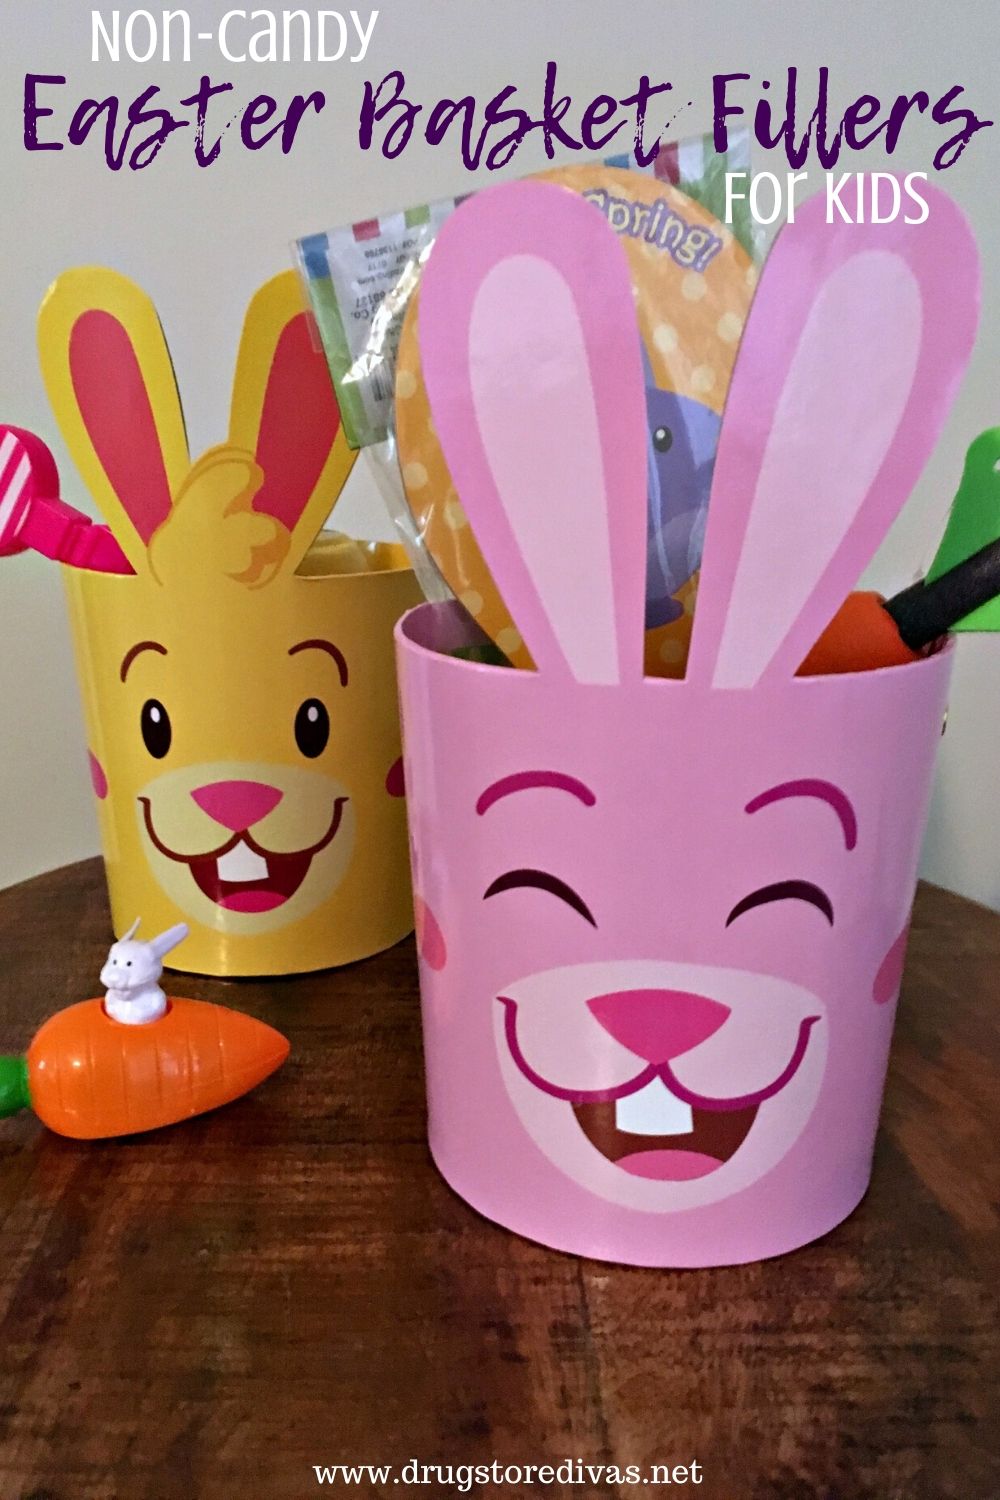 Two bunny-shaped Easter baskets with the words "Non-Candy Easter Basket Fillers For Kids" digitally written on top.